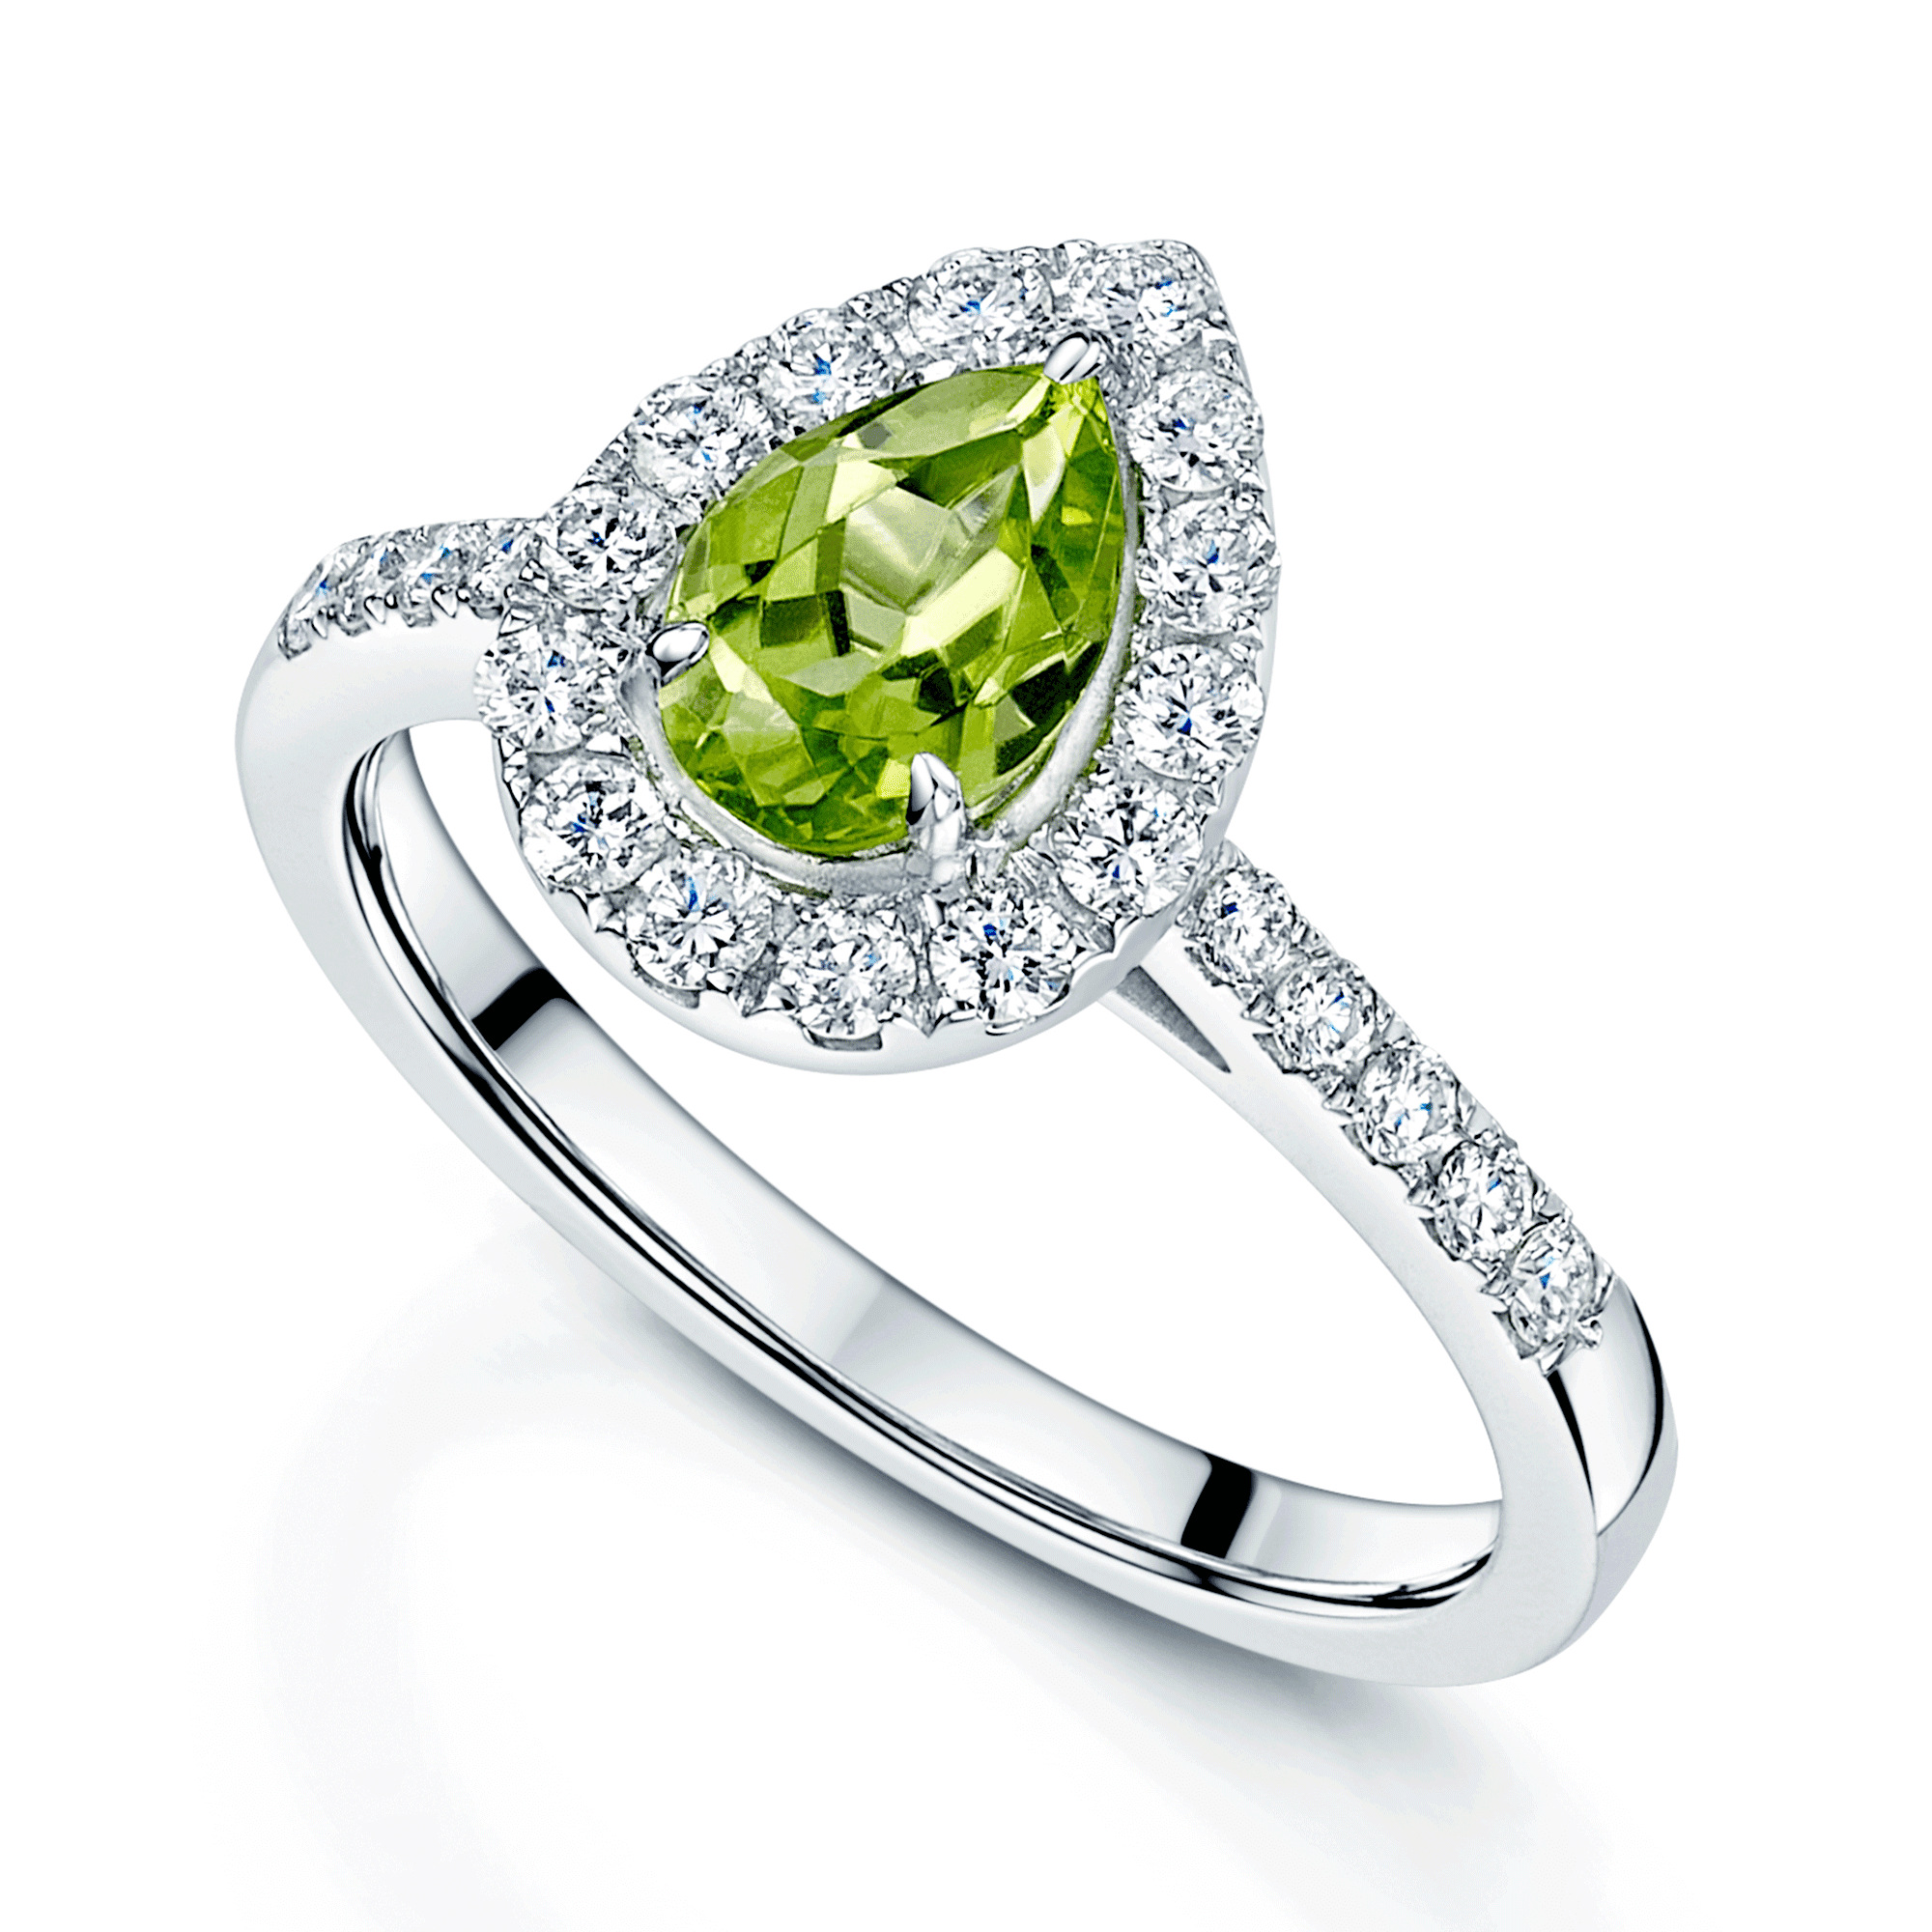 18ct White Gold Peridot & Diamond Pear Shaped Cluster Ring With Diamond Set Shoulders